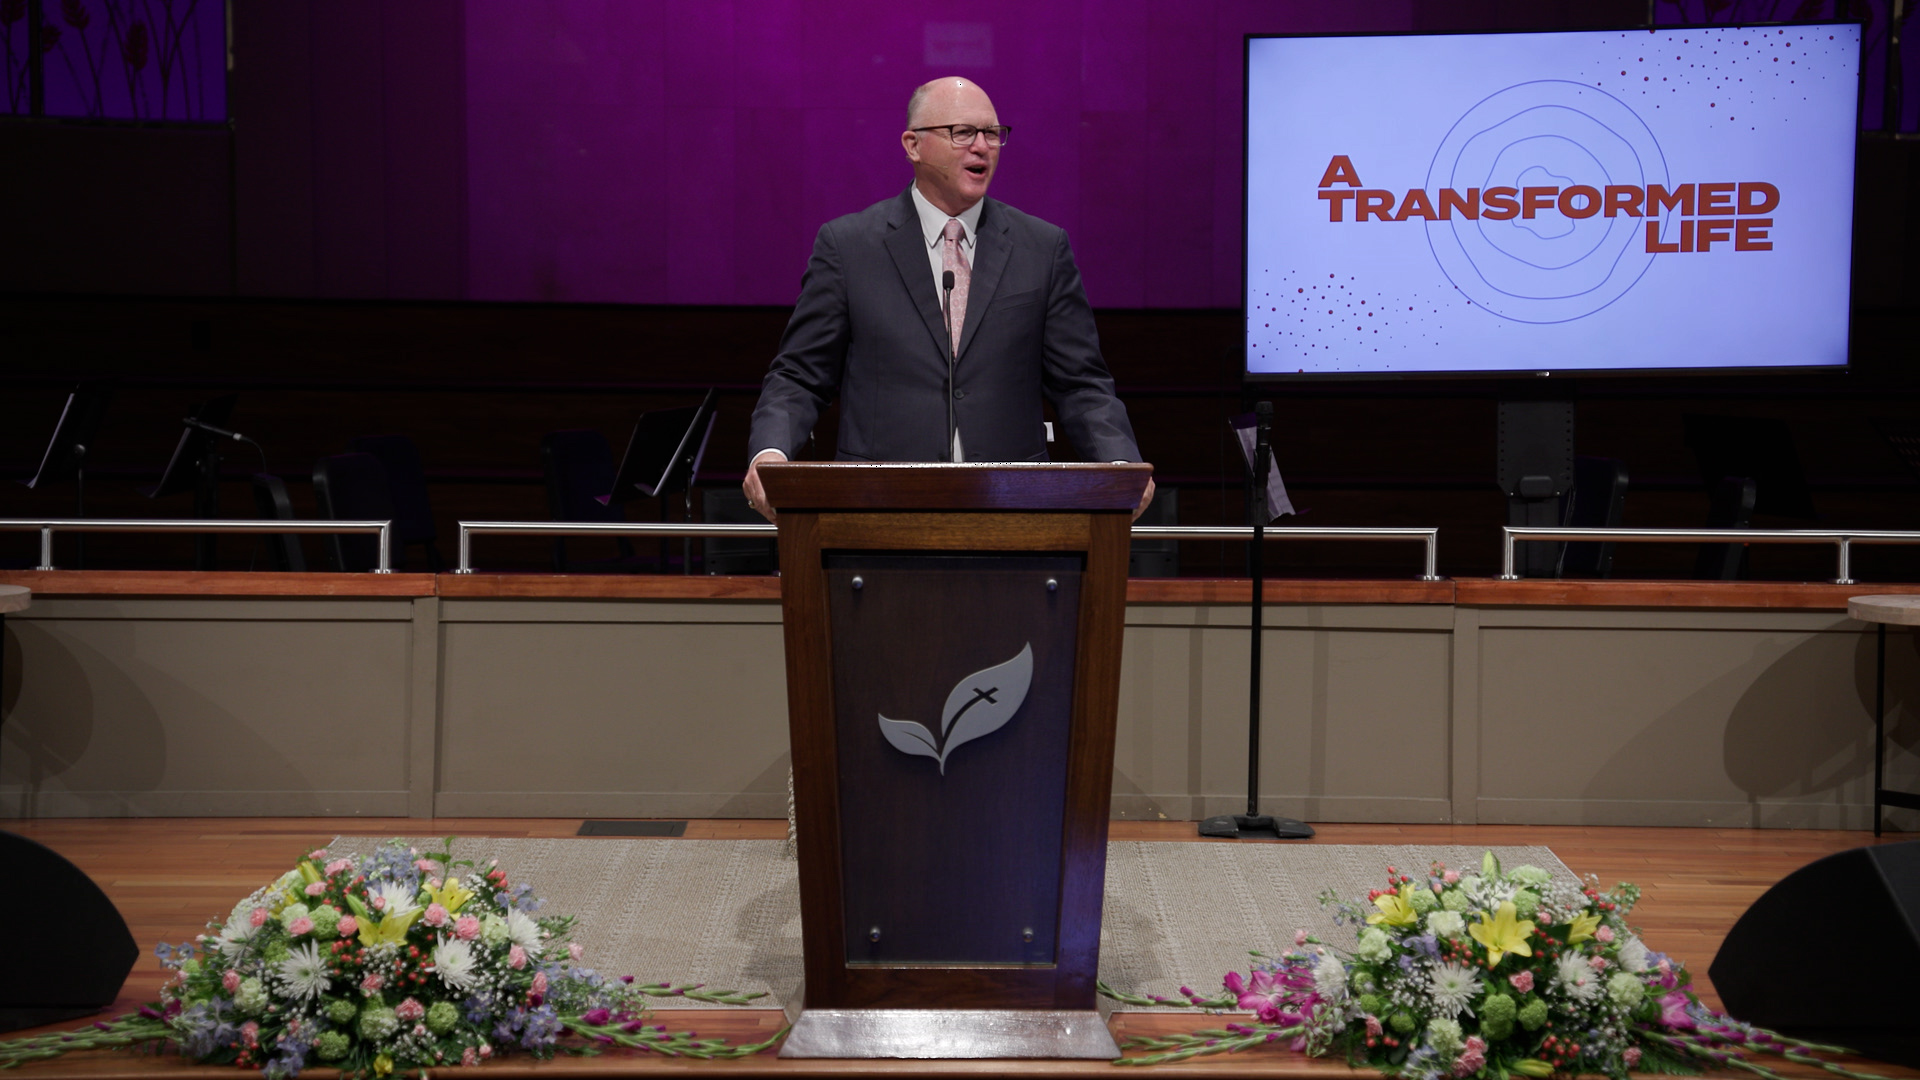 Pastor Paul Chappell: Stressed or Transformed?